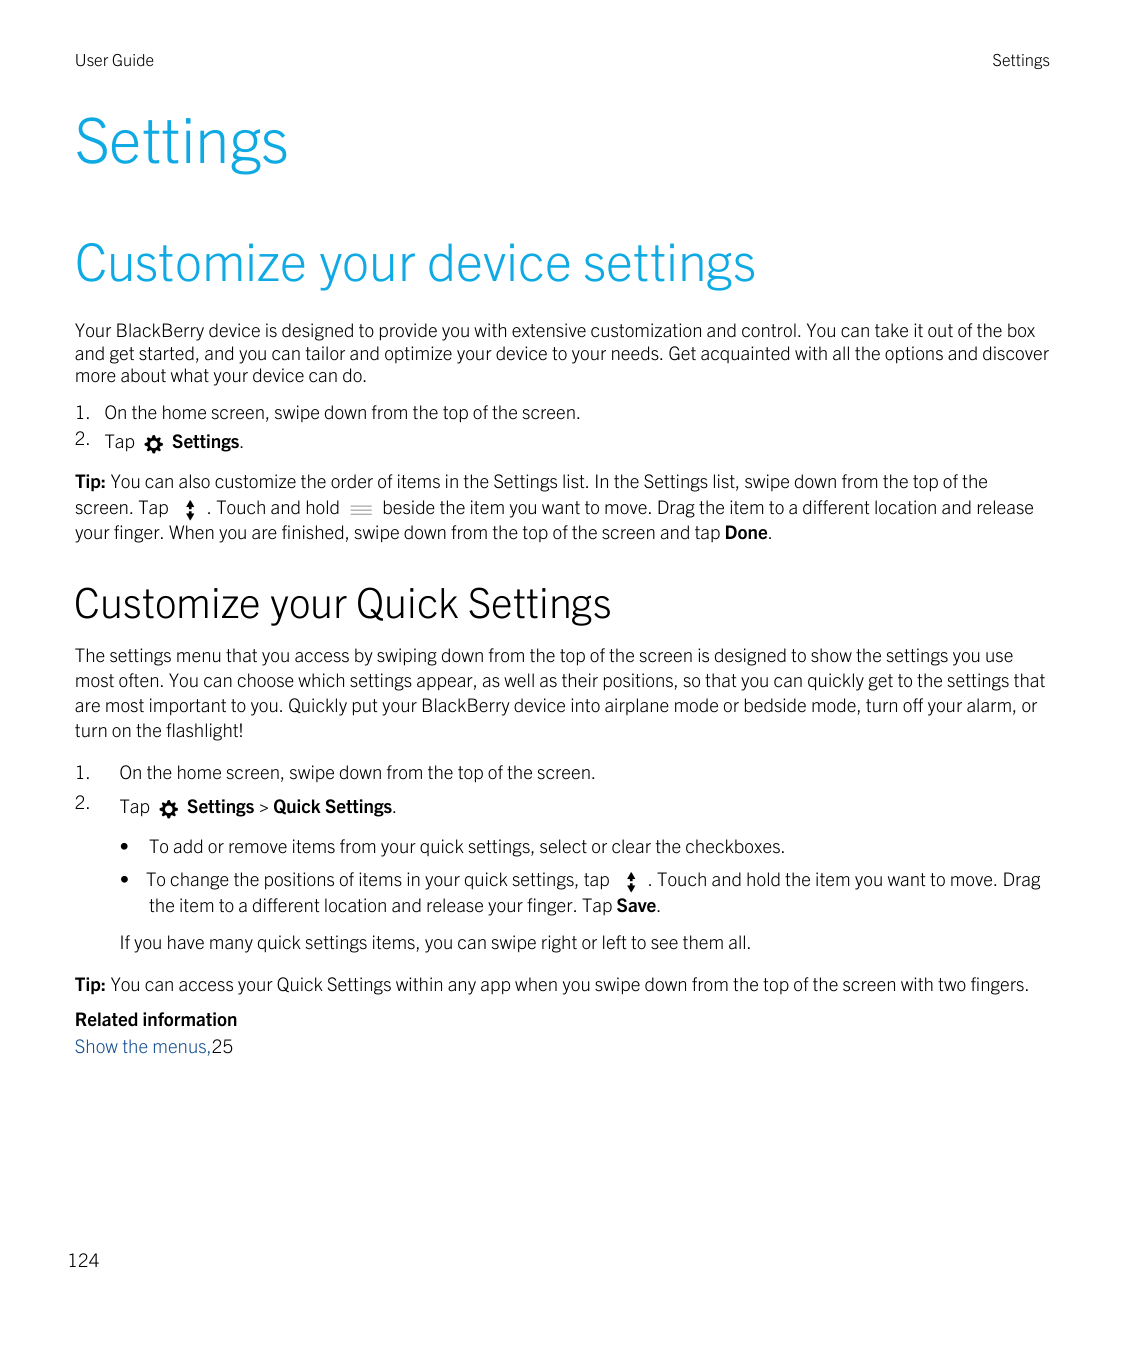 User GuideSettingsSettingsCustomize your device settingsYour BlackBerry device is designed to provide you with extensive customi